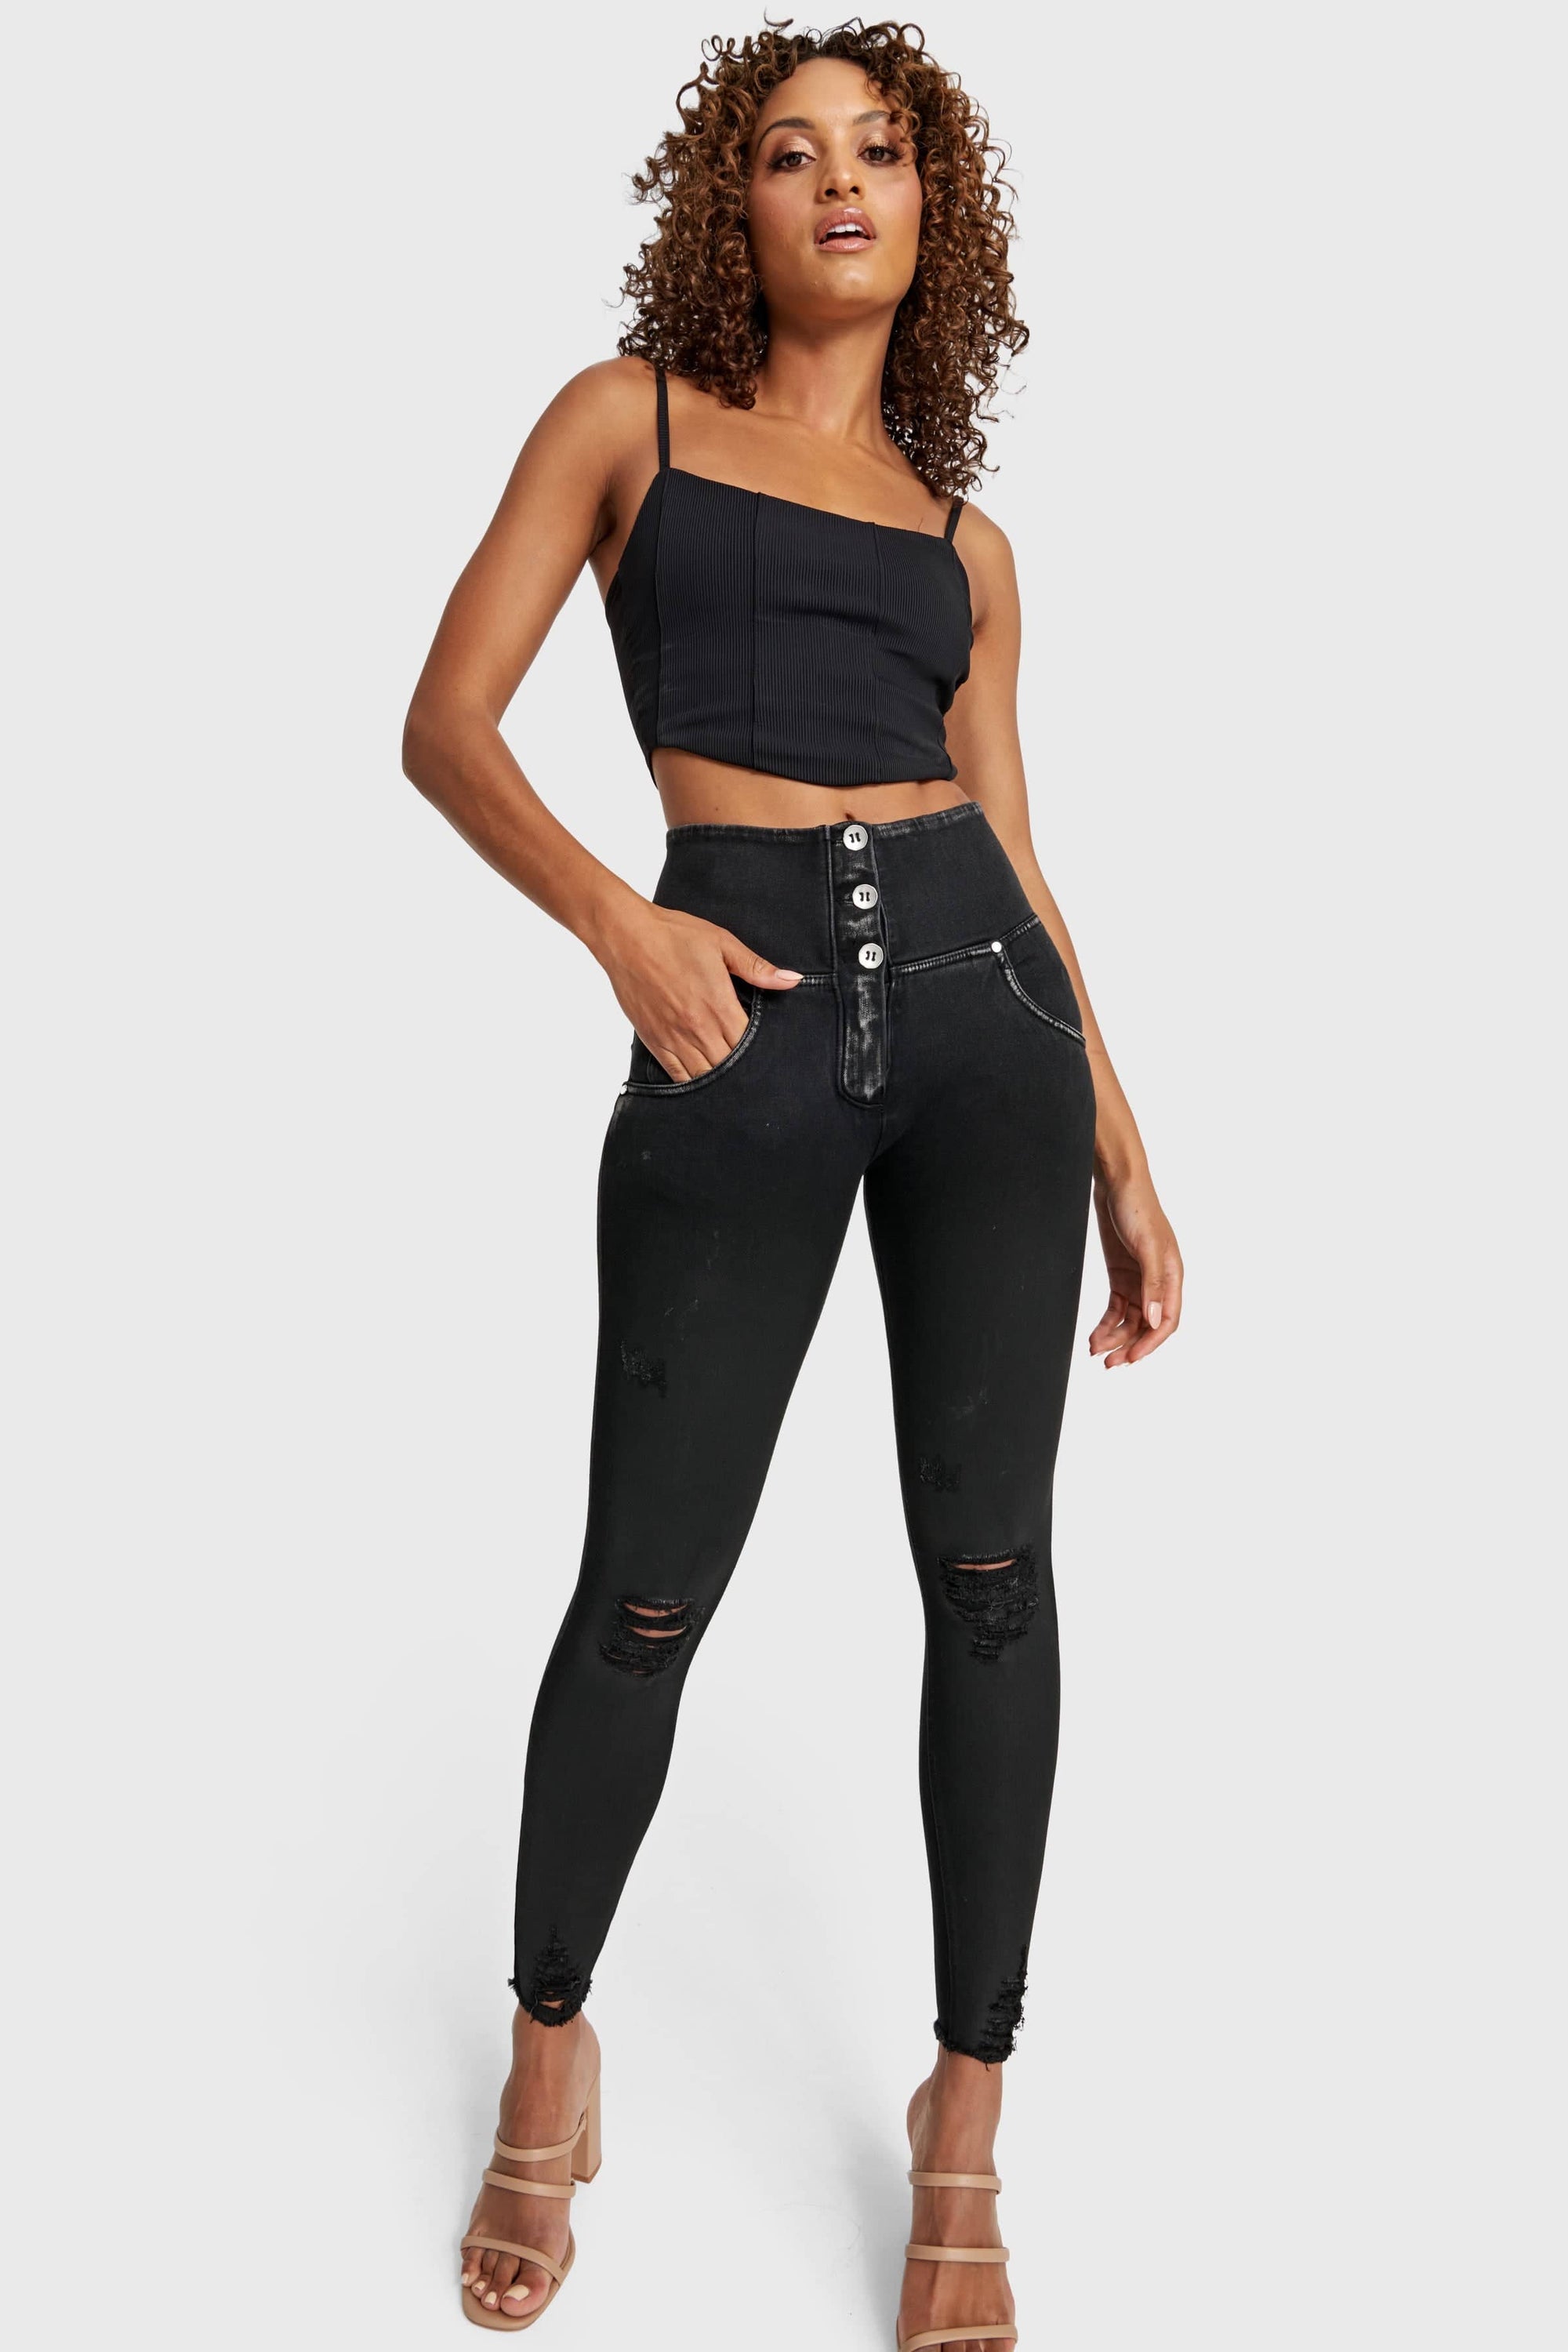 WR.UP® Snug Ripped Jeans - High Waisted - Full Length - Coated Black + Black Stitching 8